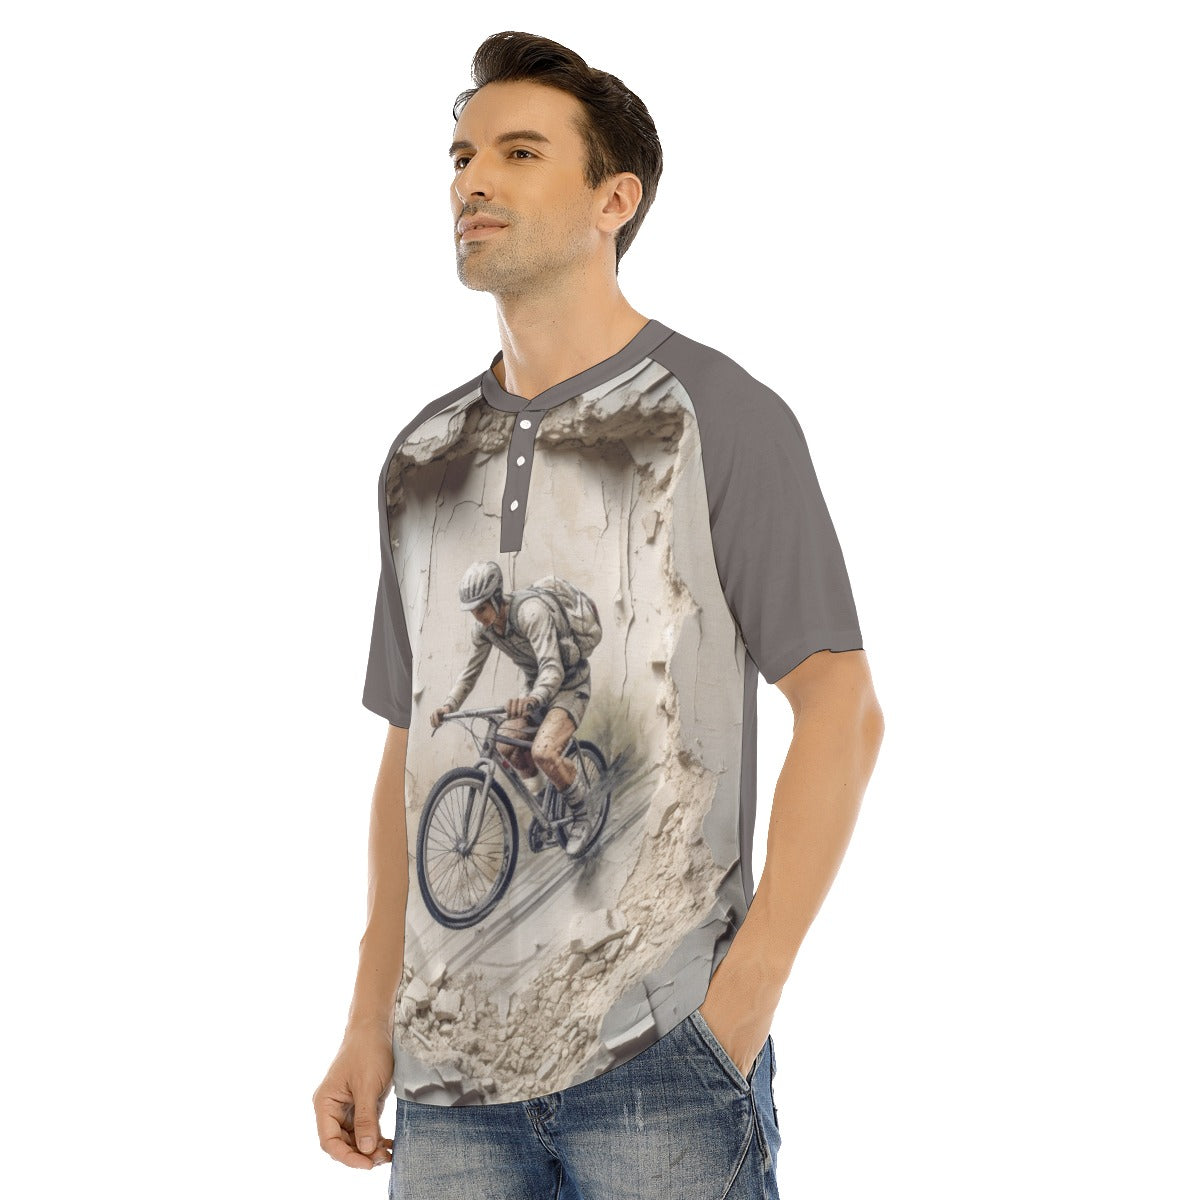 All-Over Print Men's Raglan Sleeve T-shirt With Button Closure